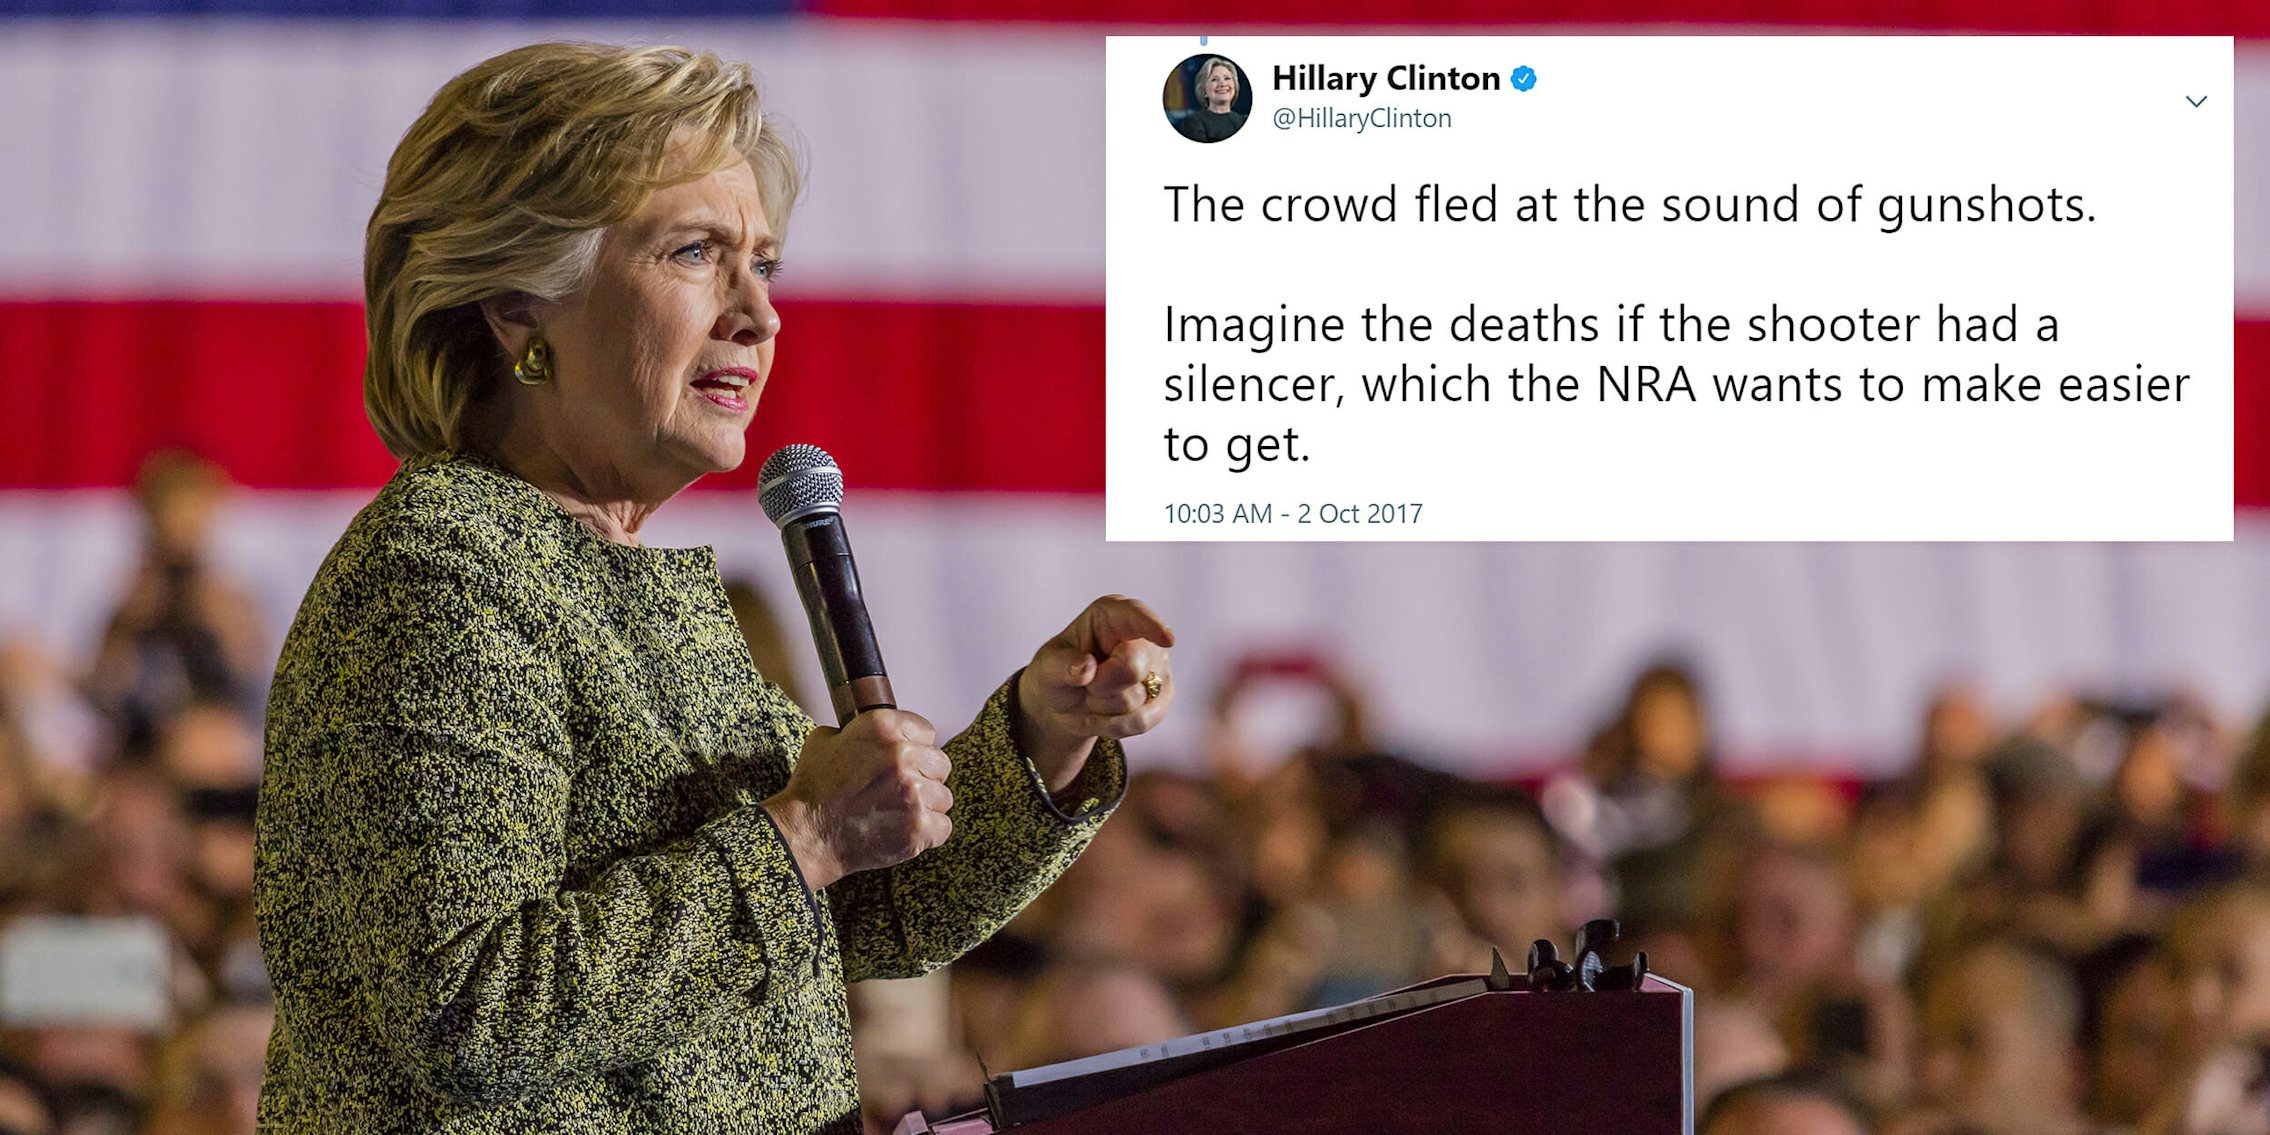 Hillary Clinton with 'The crowd fled at the sound of gunshots. Imagine the deaths if the shooter had a silencer, which the NRA wants to make easier to get.' tweet